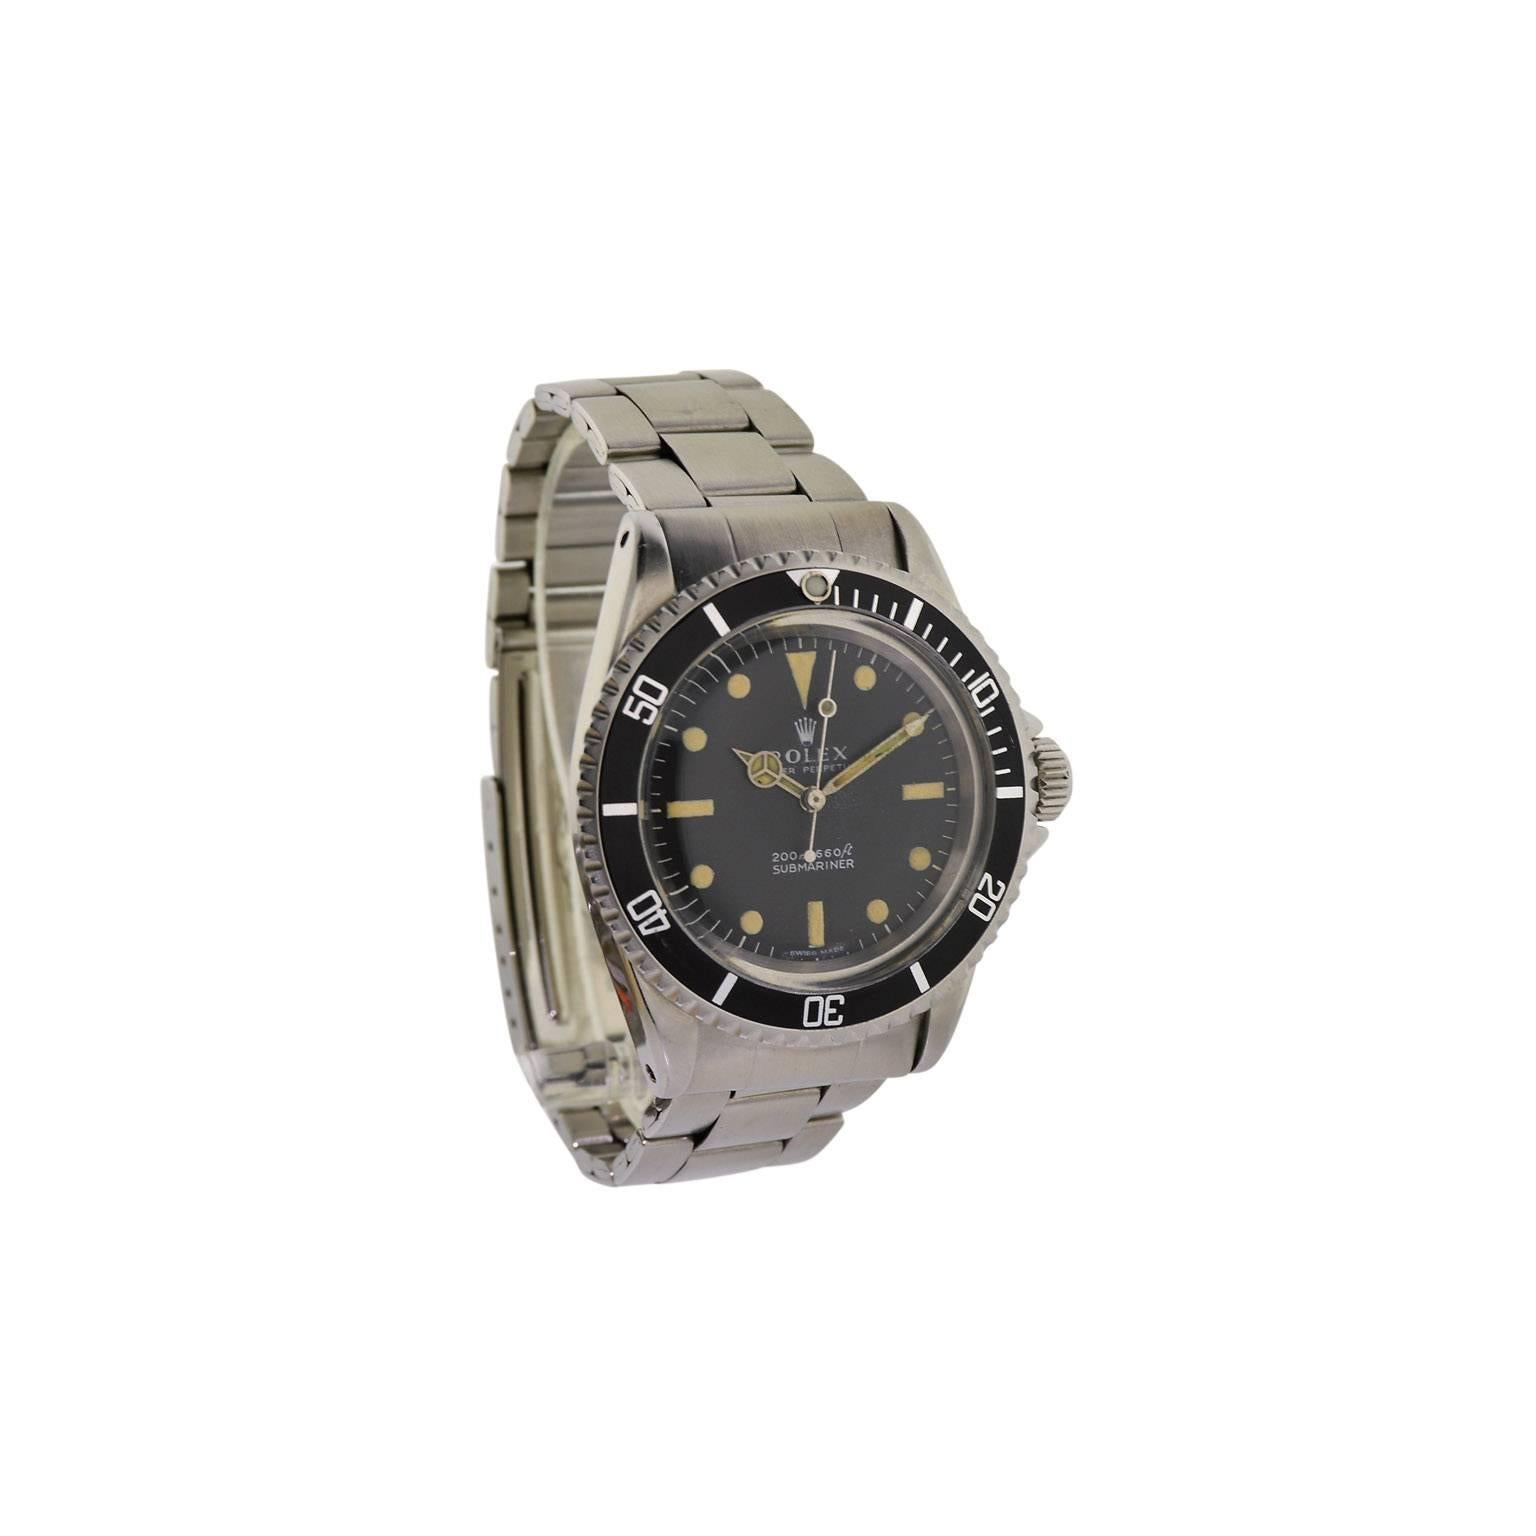 FACTORY / HOUSE: Rolex Watch Company
STYLE / REFERENCE:  Submariner / Ref. 5513
METAL / MATERIAL: Stainless Steel
DIMENSIONS: 47 mm X 39  mm
CIRCA: 1967 / 1968
MOVEMENT / CALIBER: Perpetual Winding /  Jewels / Cal. 1520
DIAL / HANDS: Original Black